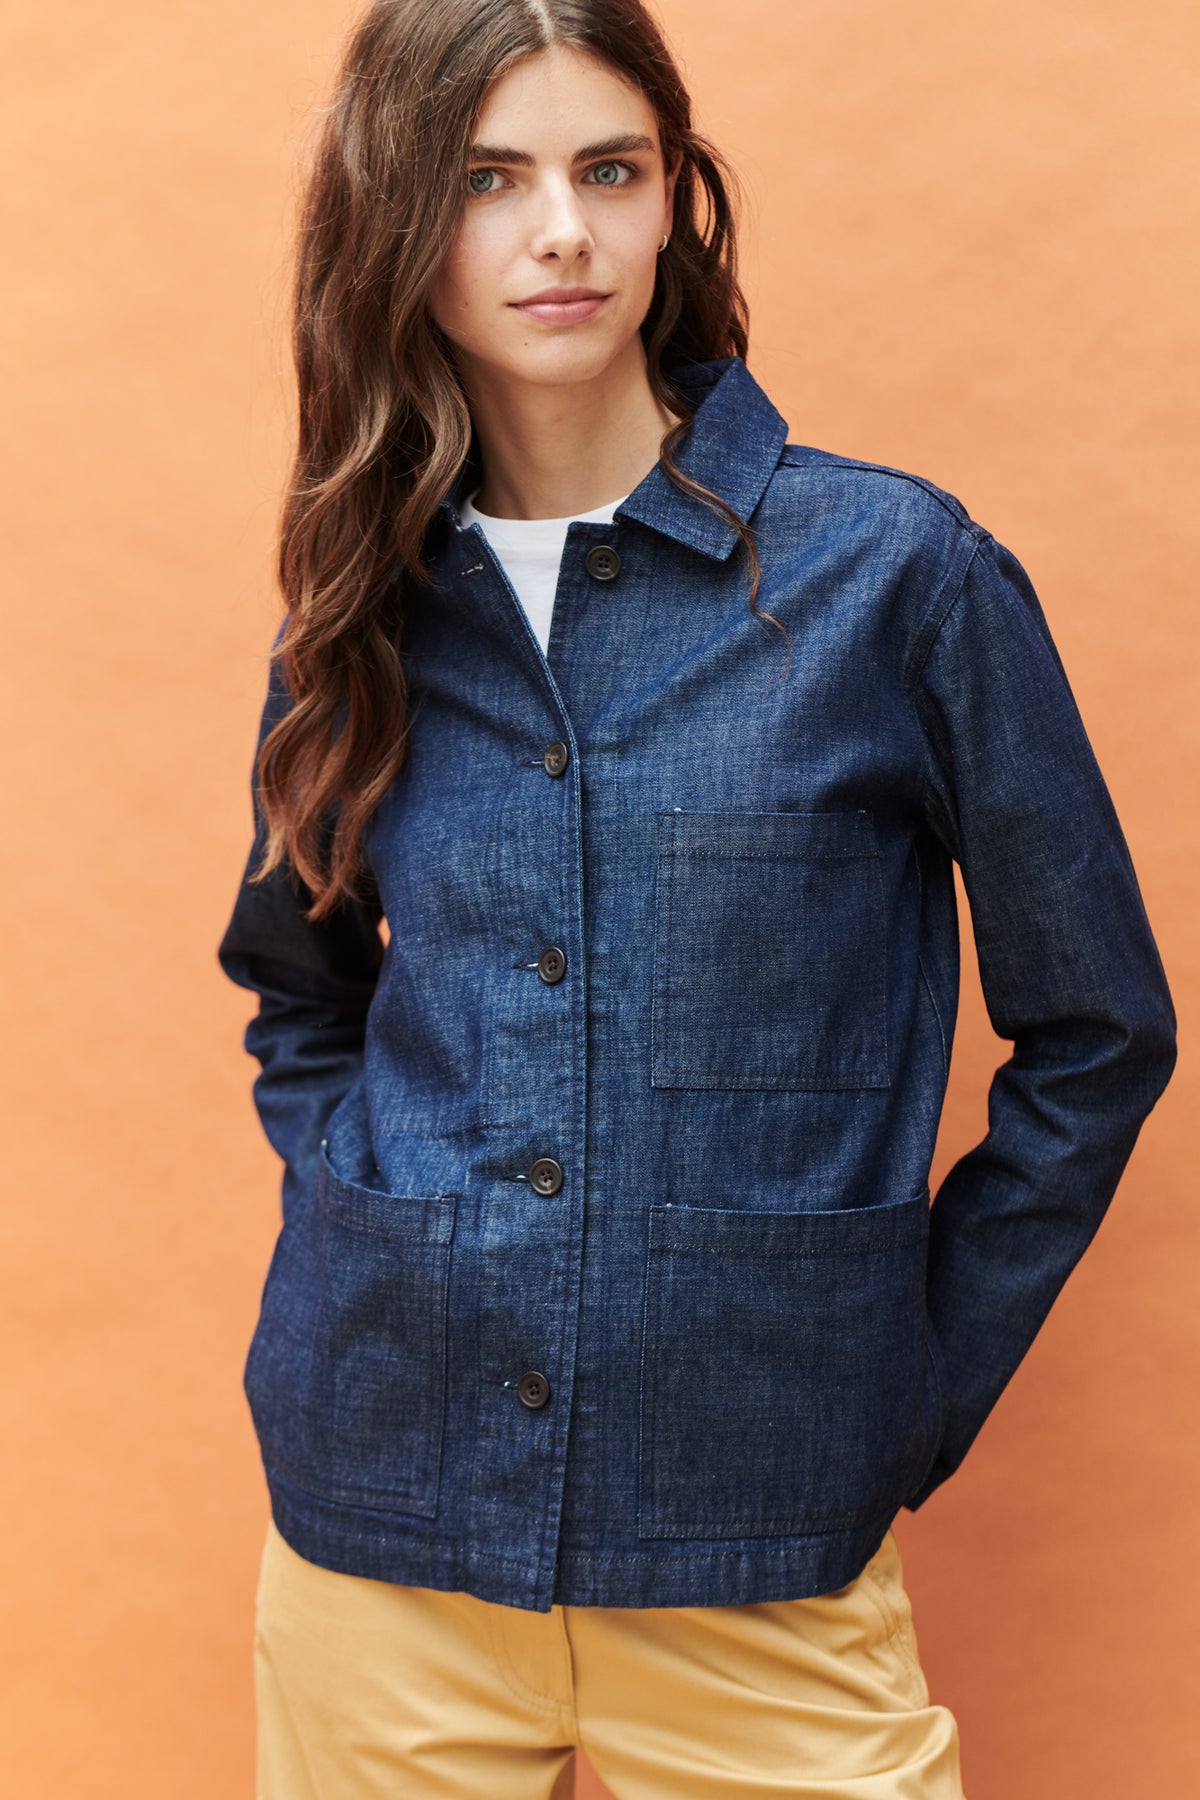 
            Front, thigh up image of brunette female wearing buttonedchore jacket in denim